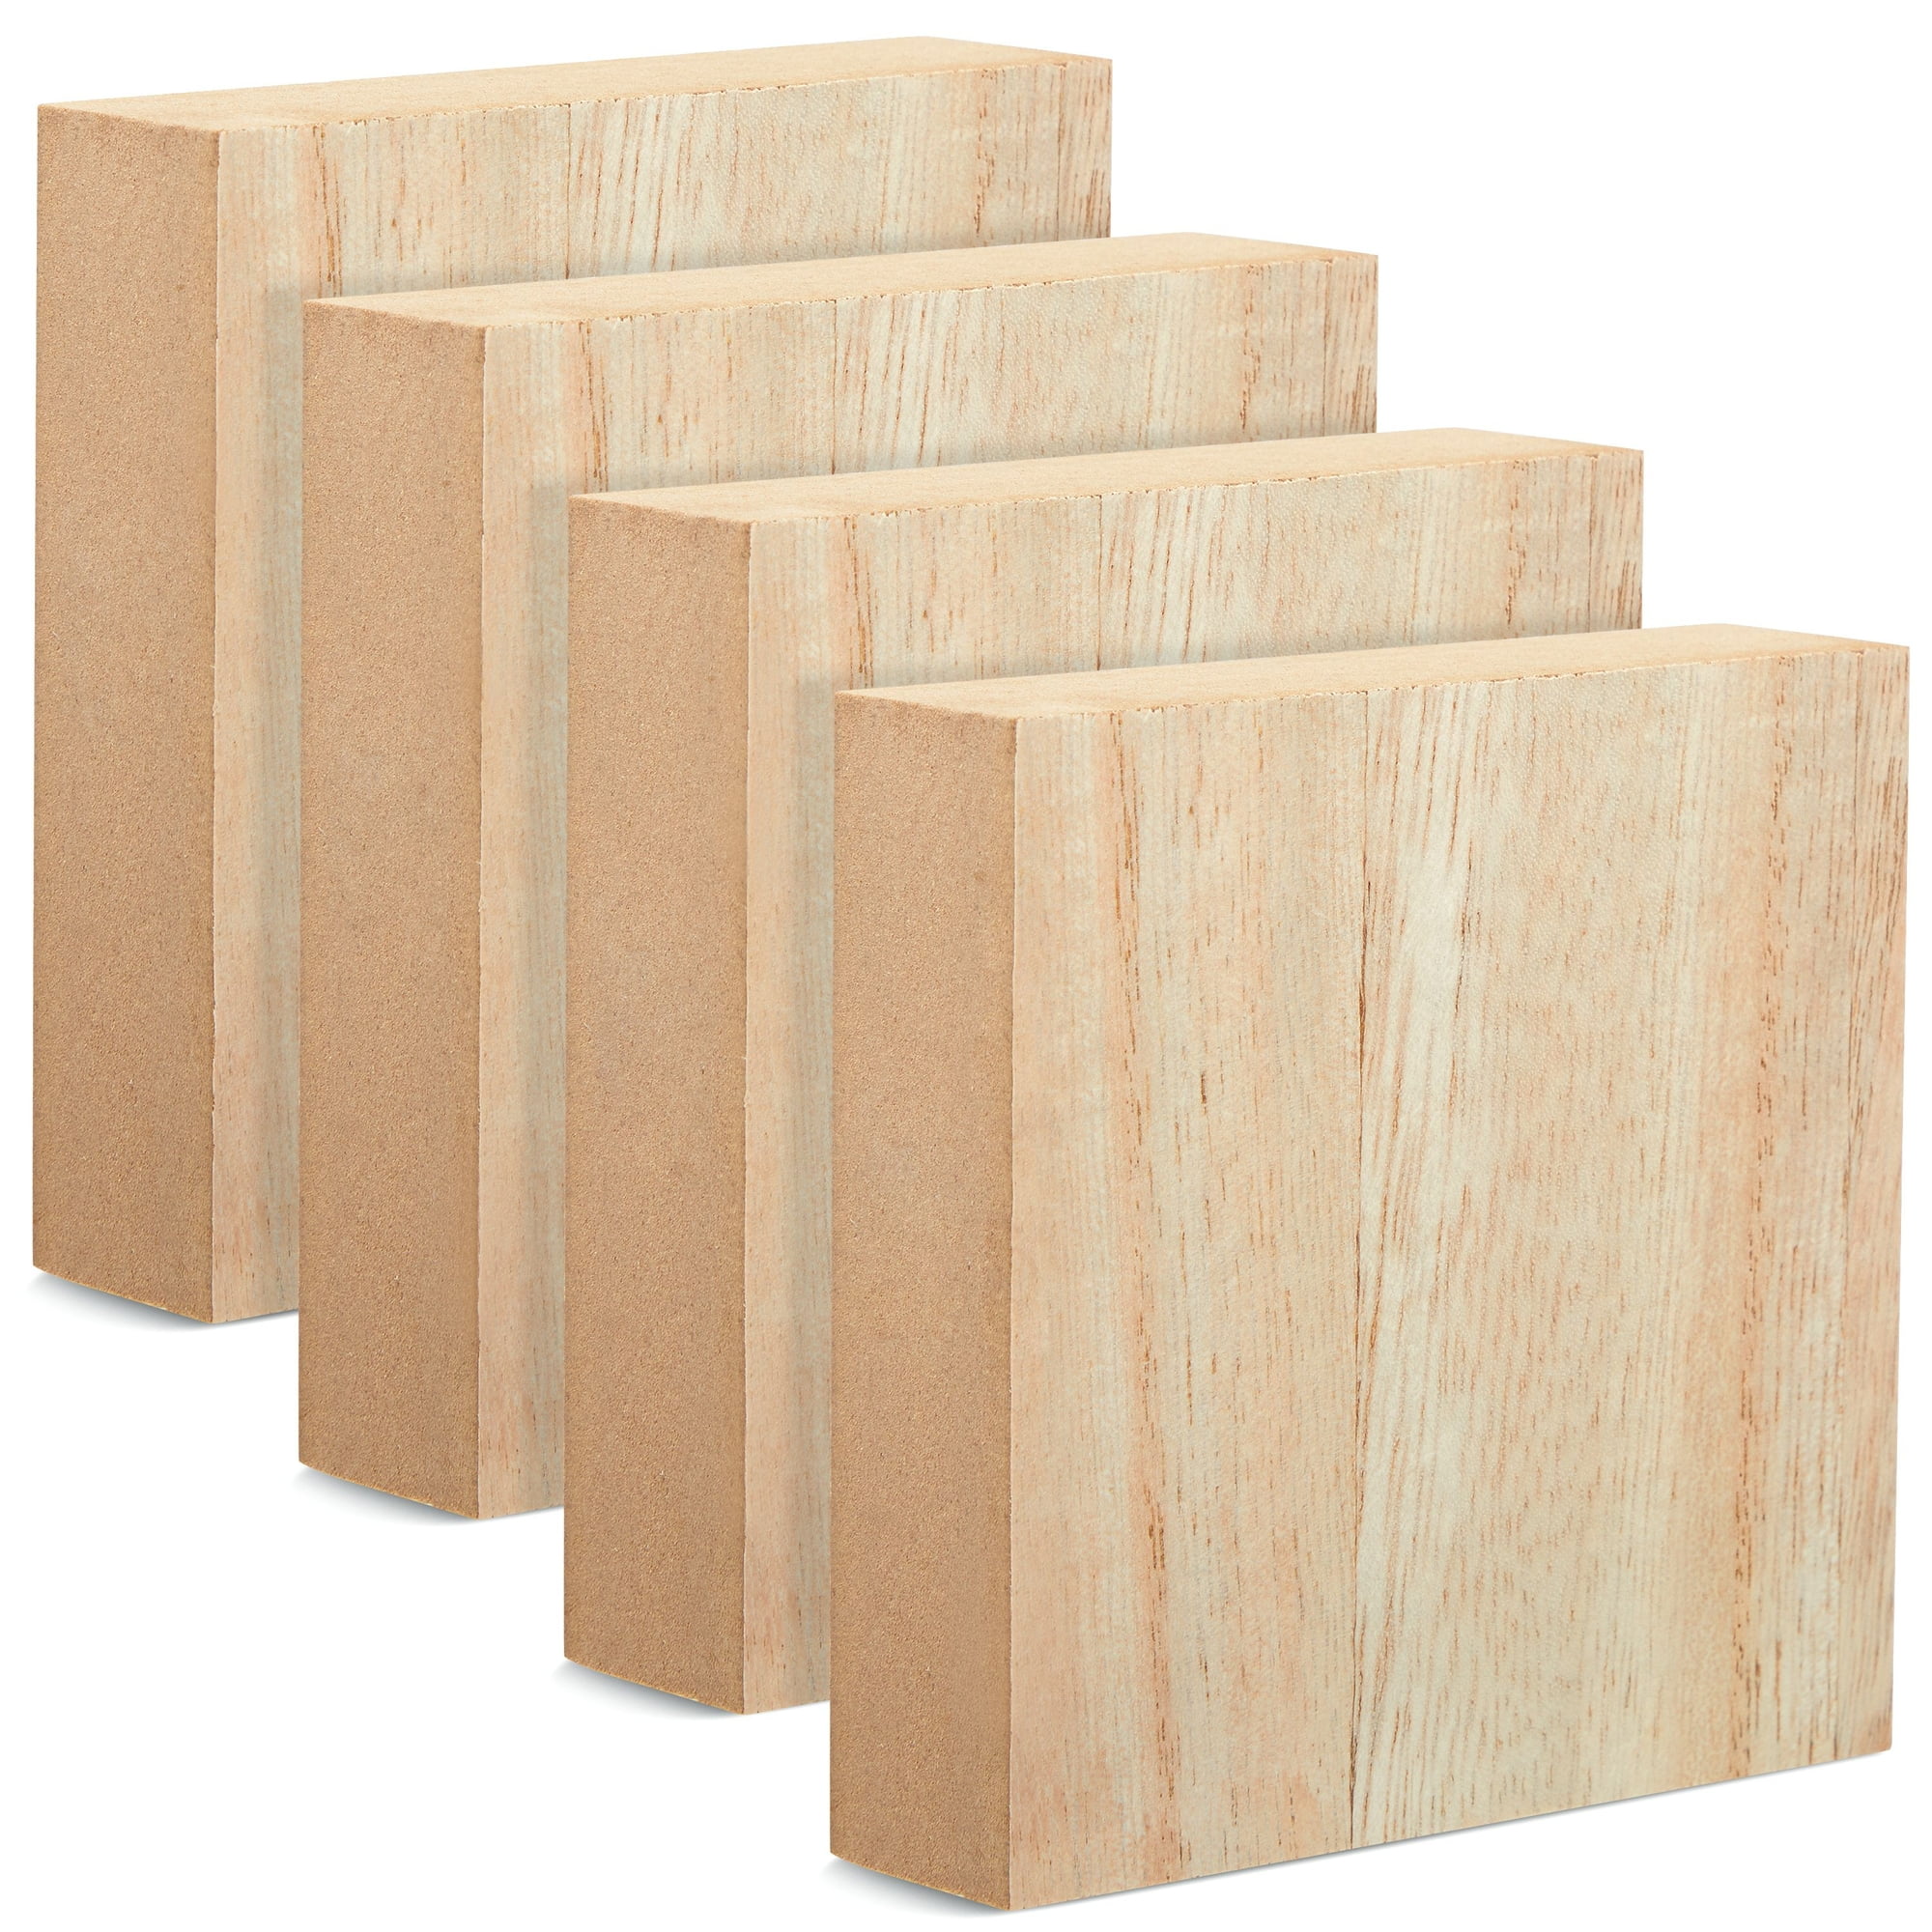 Buy Unfinished Wooden Blocks 3/4-inch, Small Wood Cubes for Crafts and  Educational Activities at S&S Worldwide